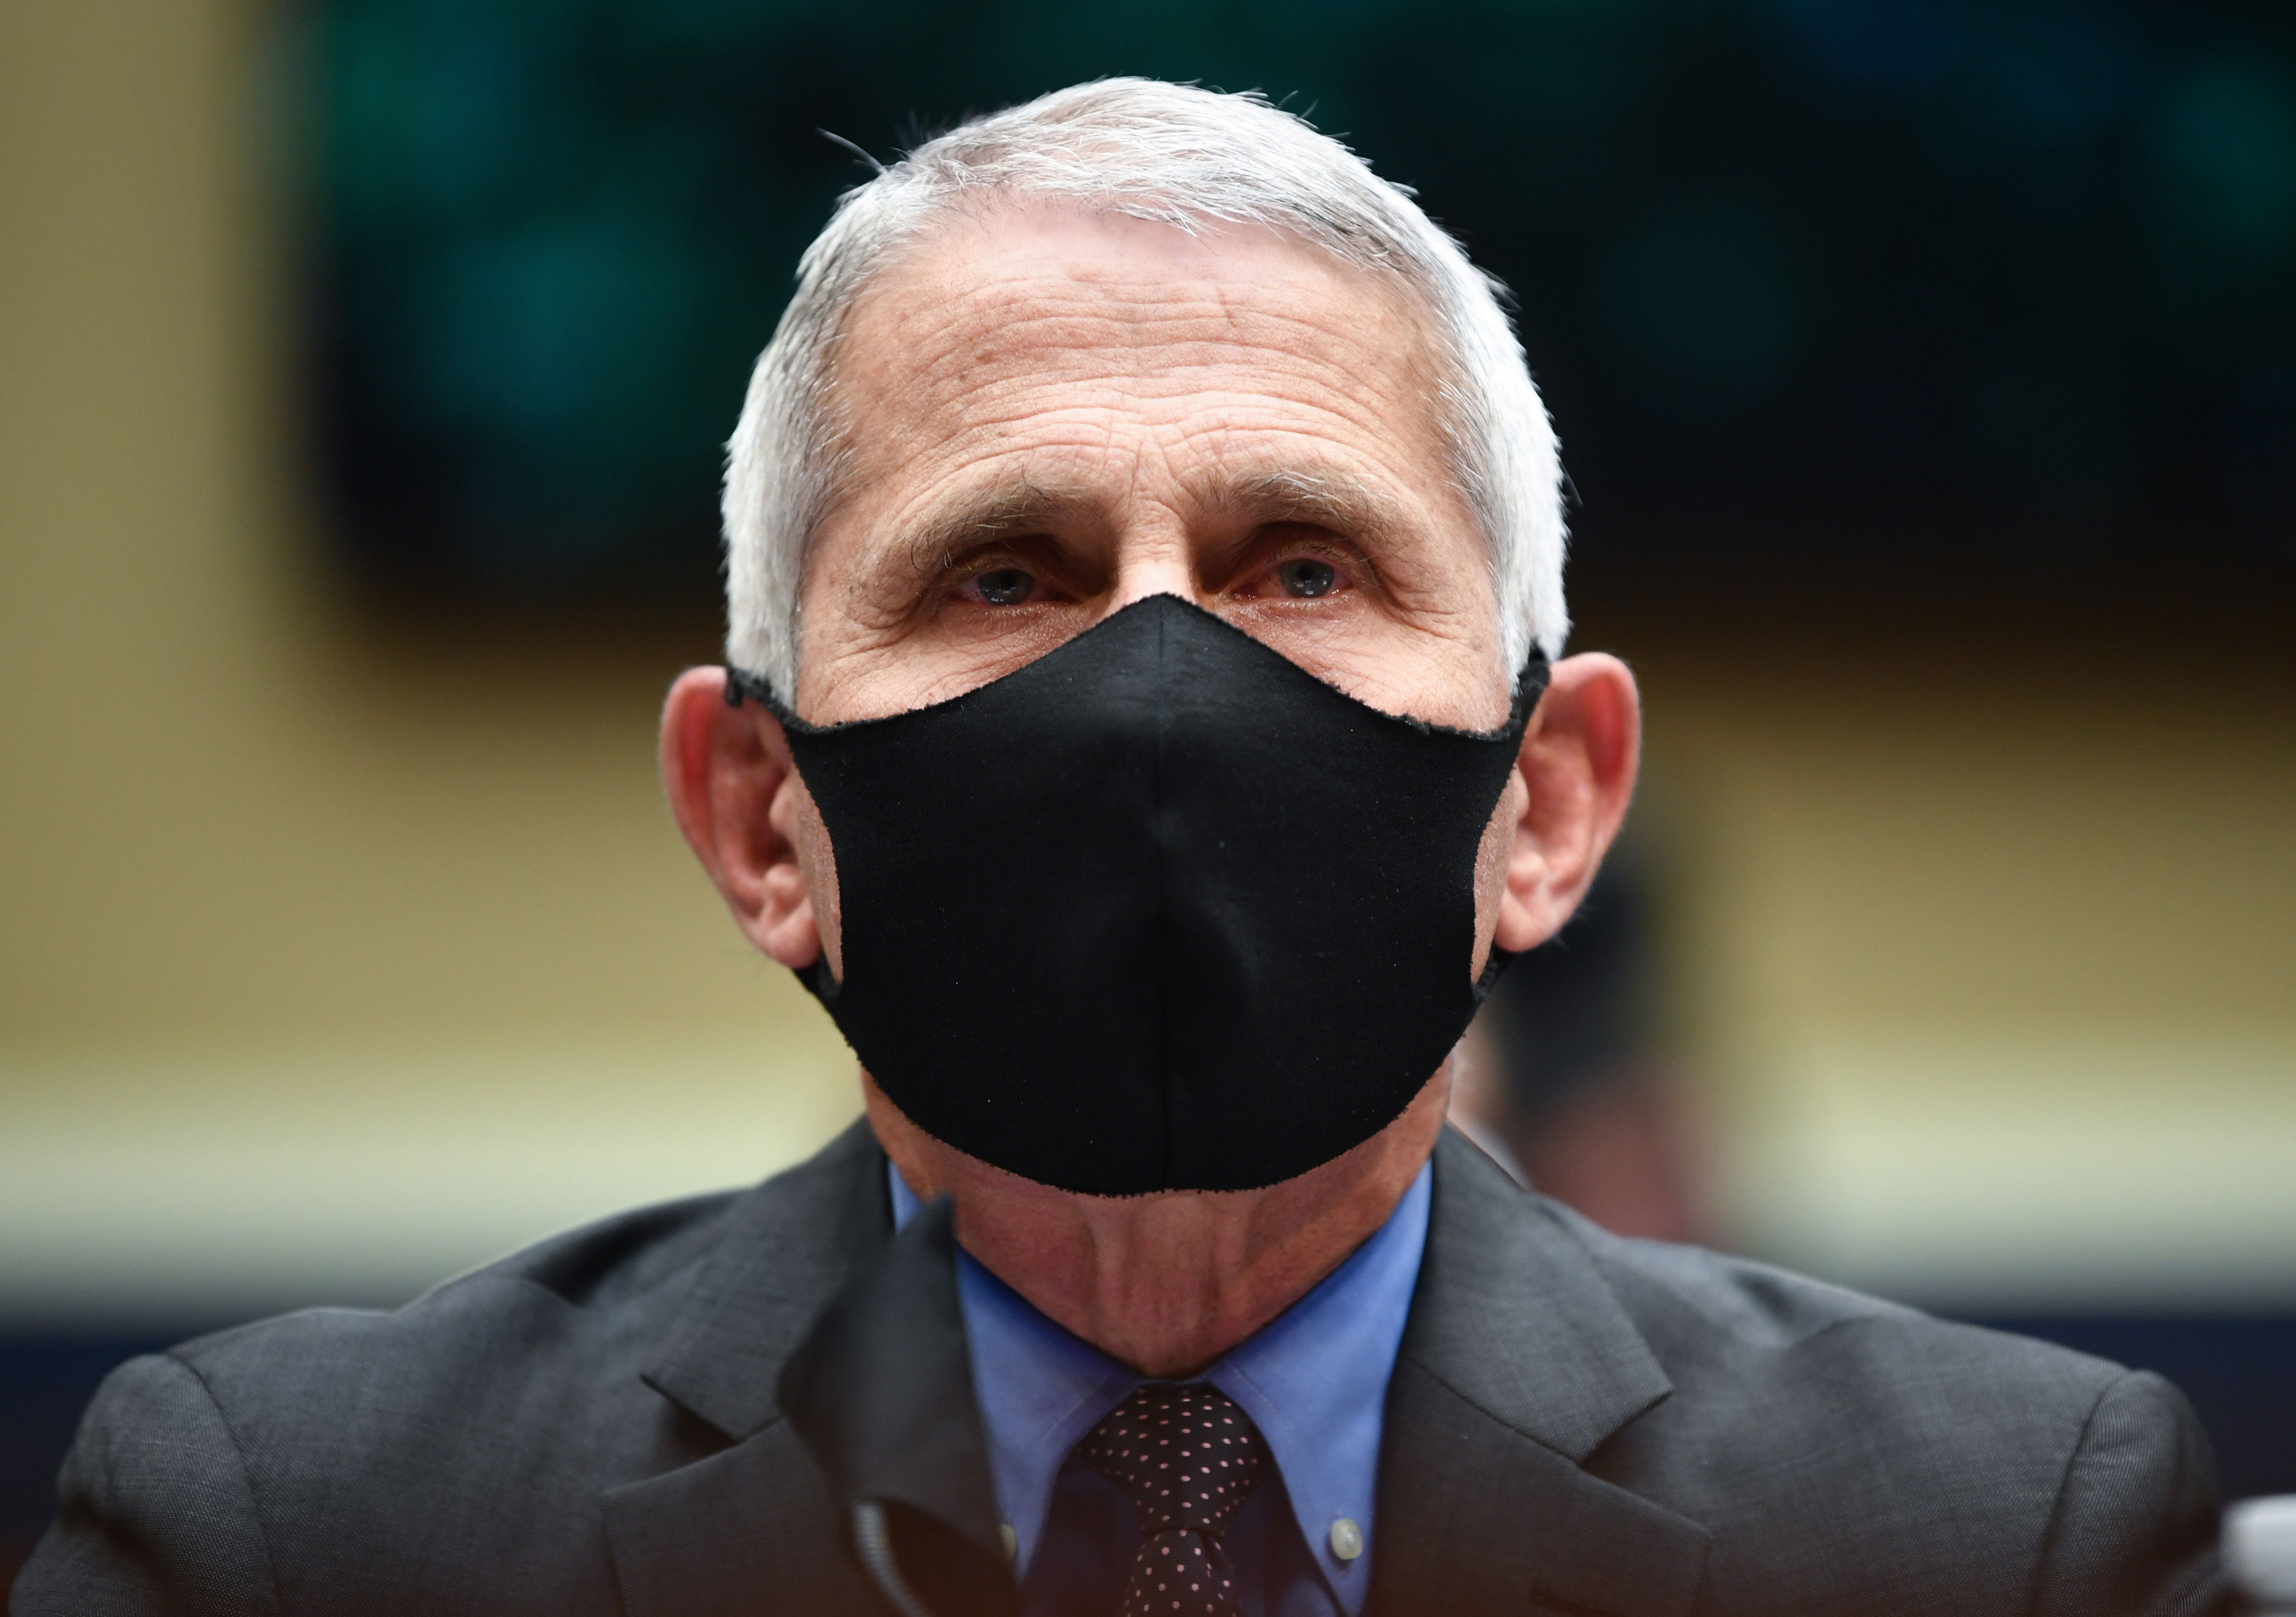 Dr. Anthony Fauci testifies in Washington, DC, on June 23.